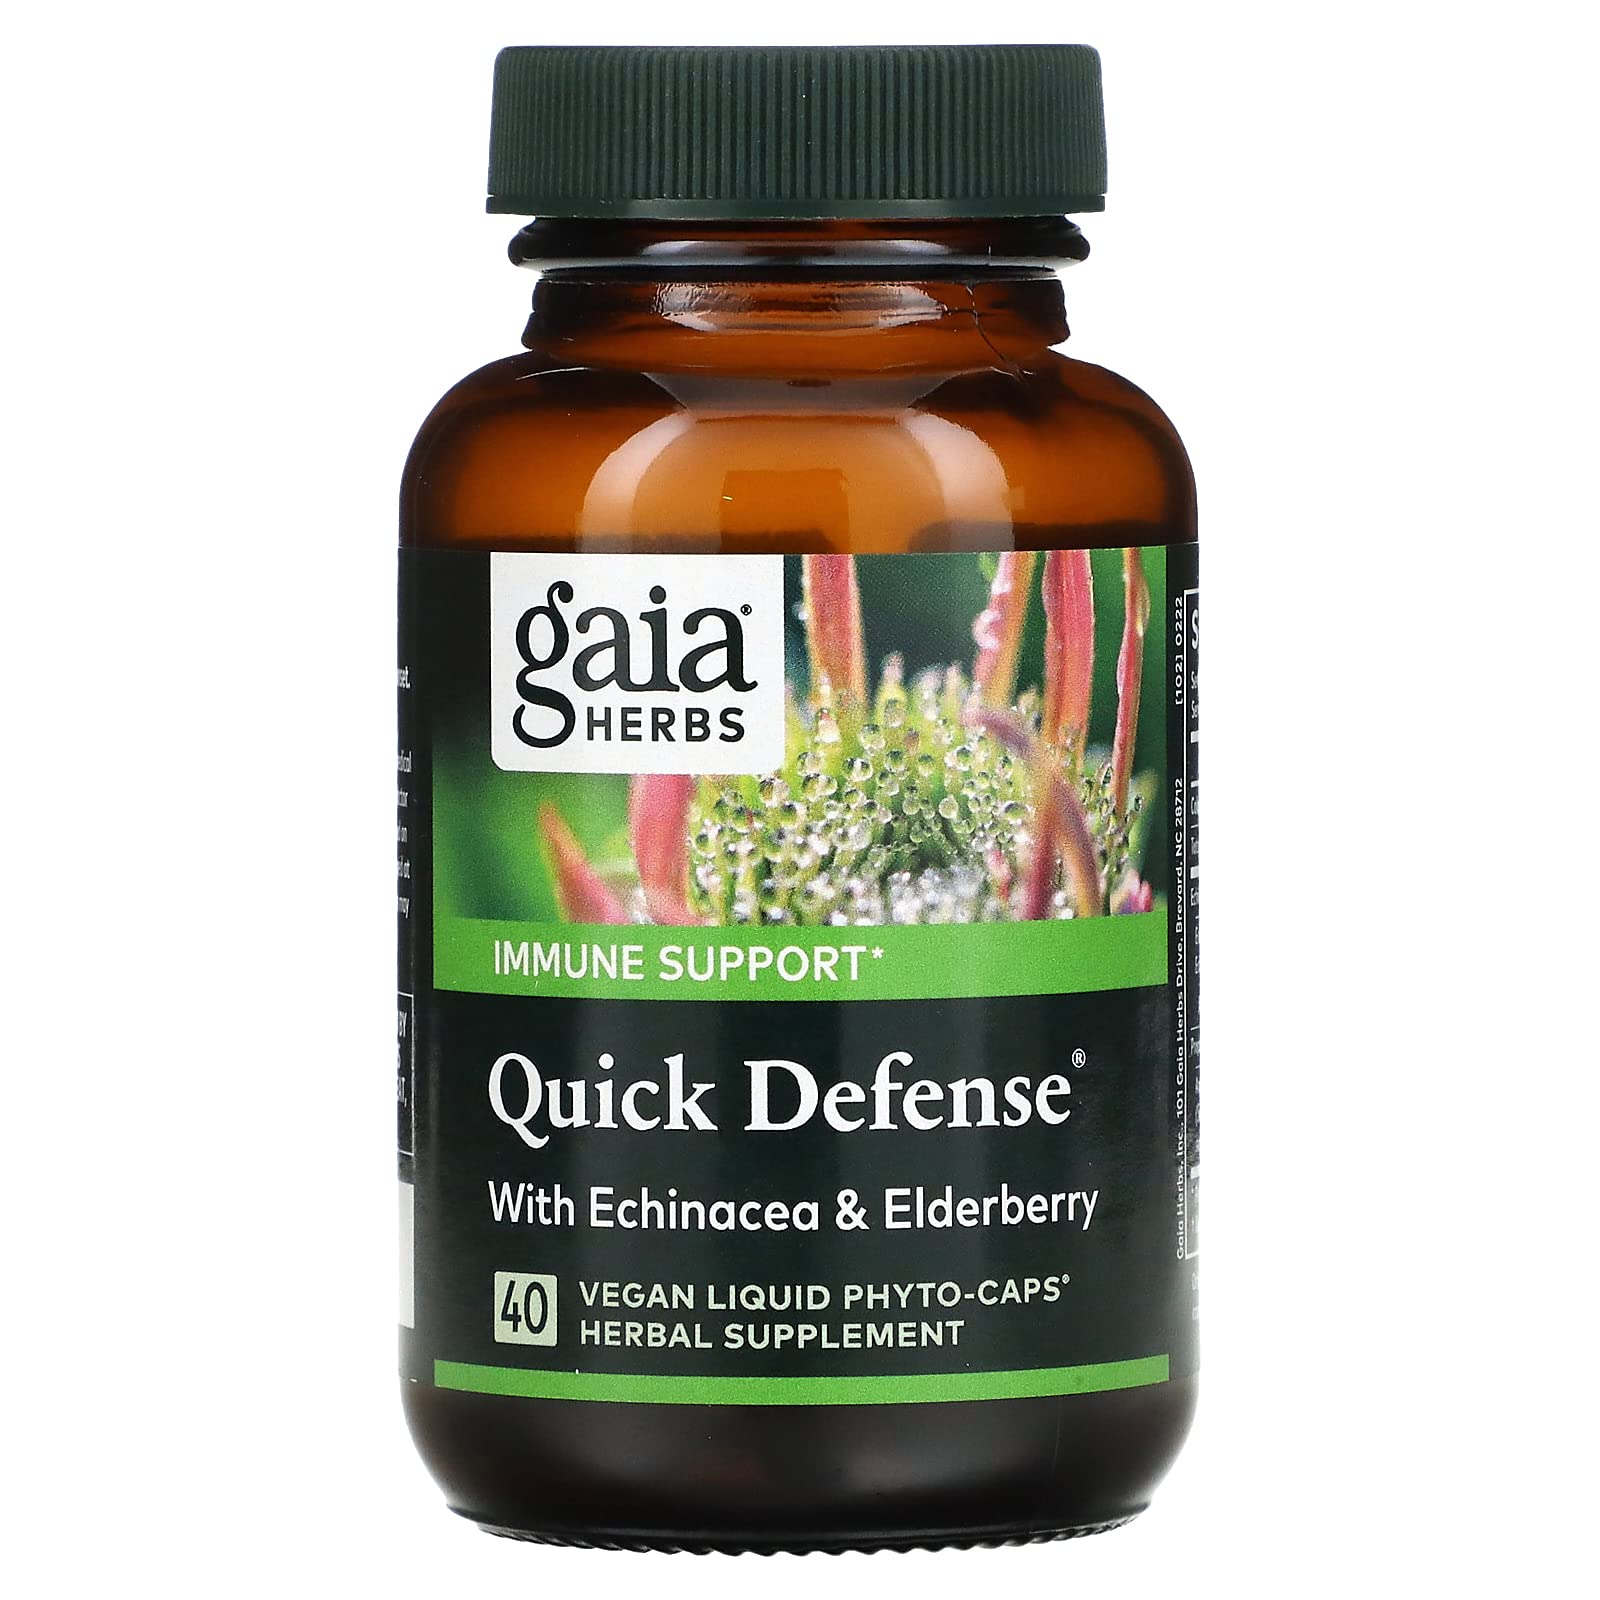 Gaia Herbs Pro Immune Activator - Immune Support Supplement with Elderberry & Ginger - Herbal Supplement & Andrographis Capsules to Aid Immune System & Natural Health Response - 40 Liquid Phyto-Caps